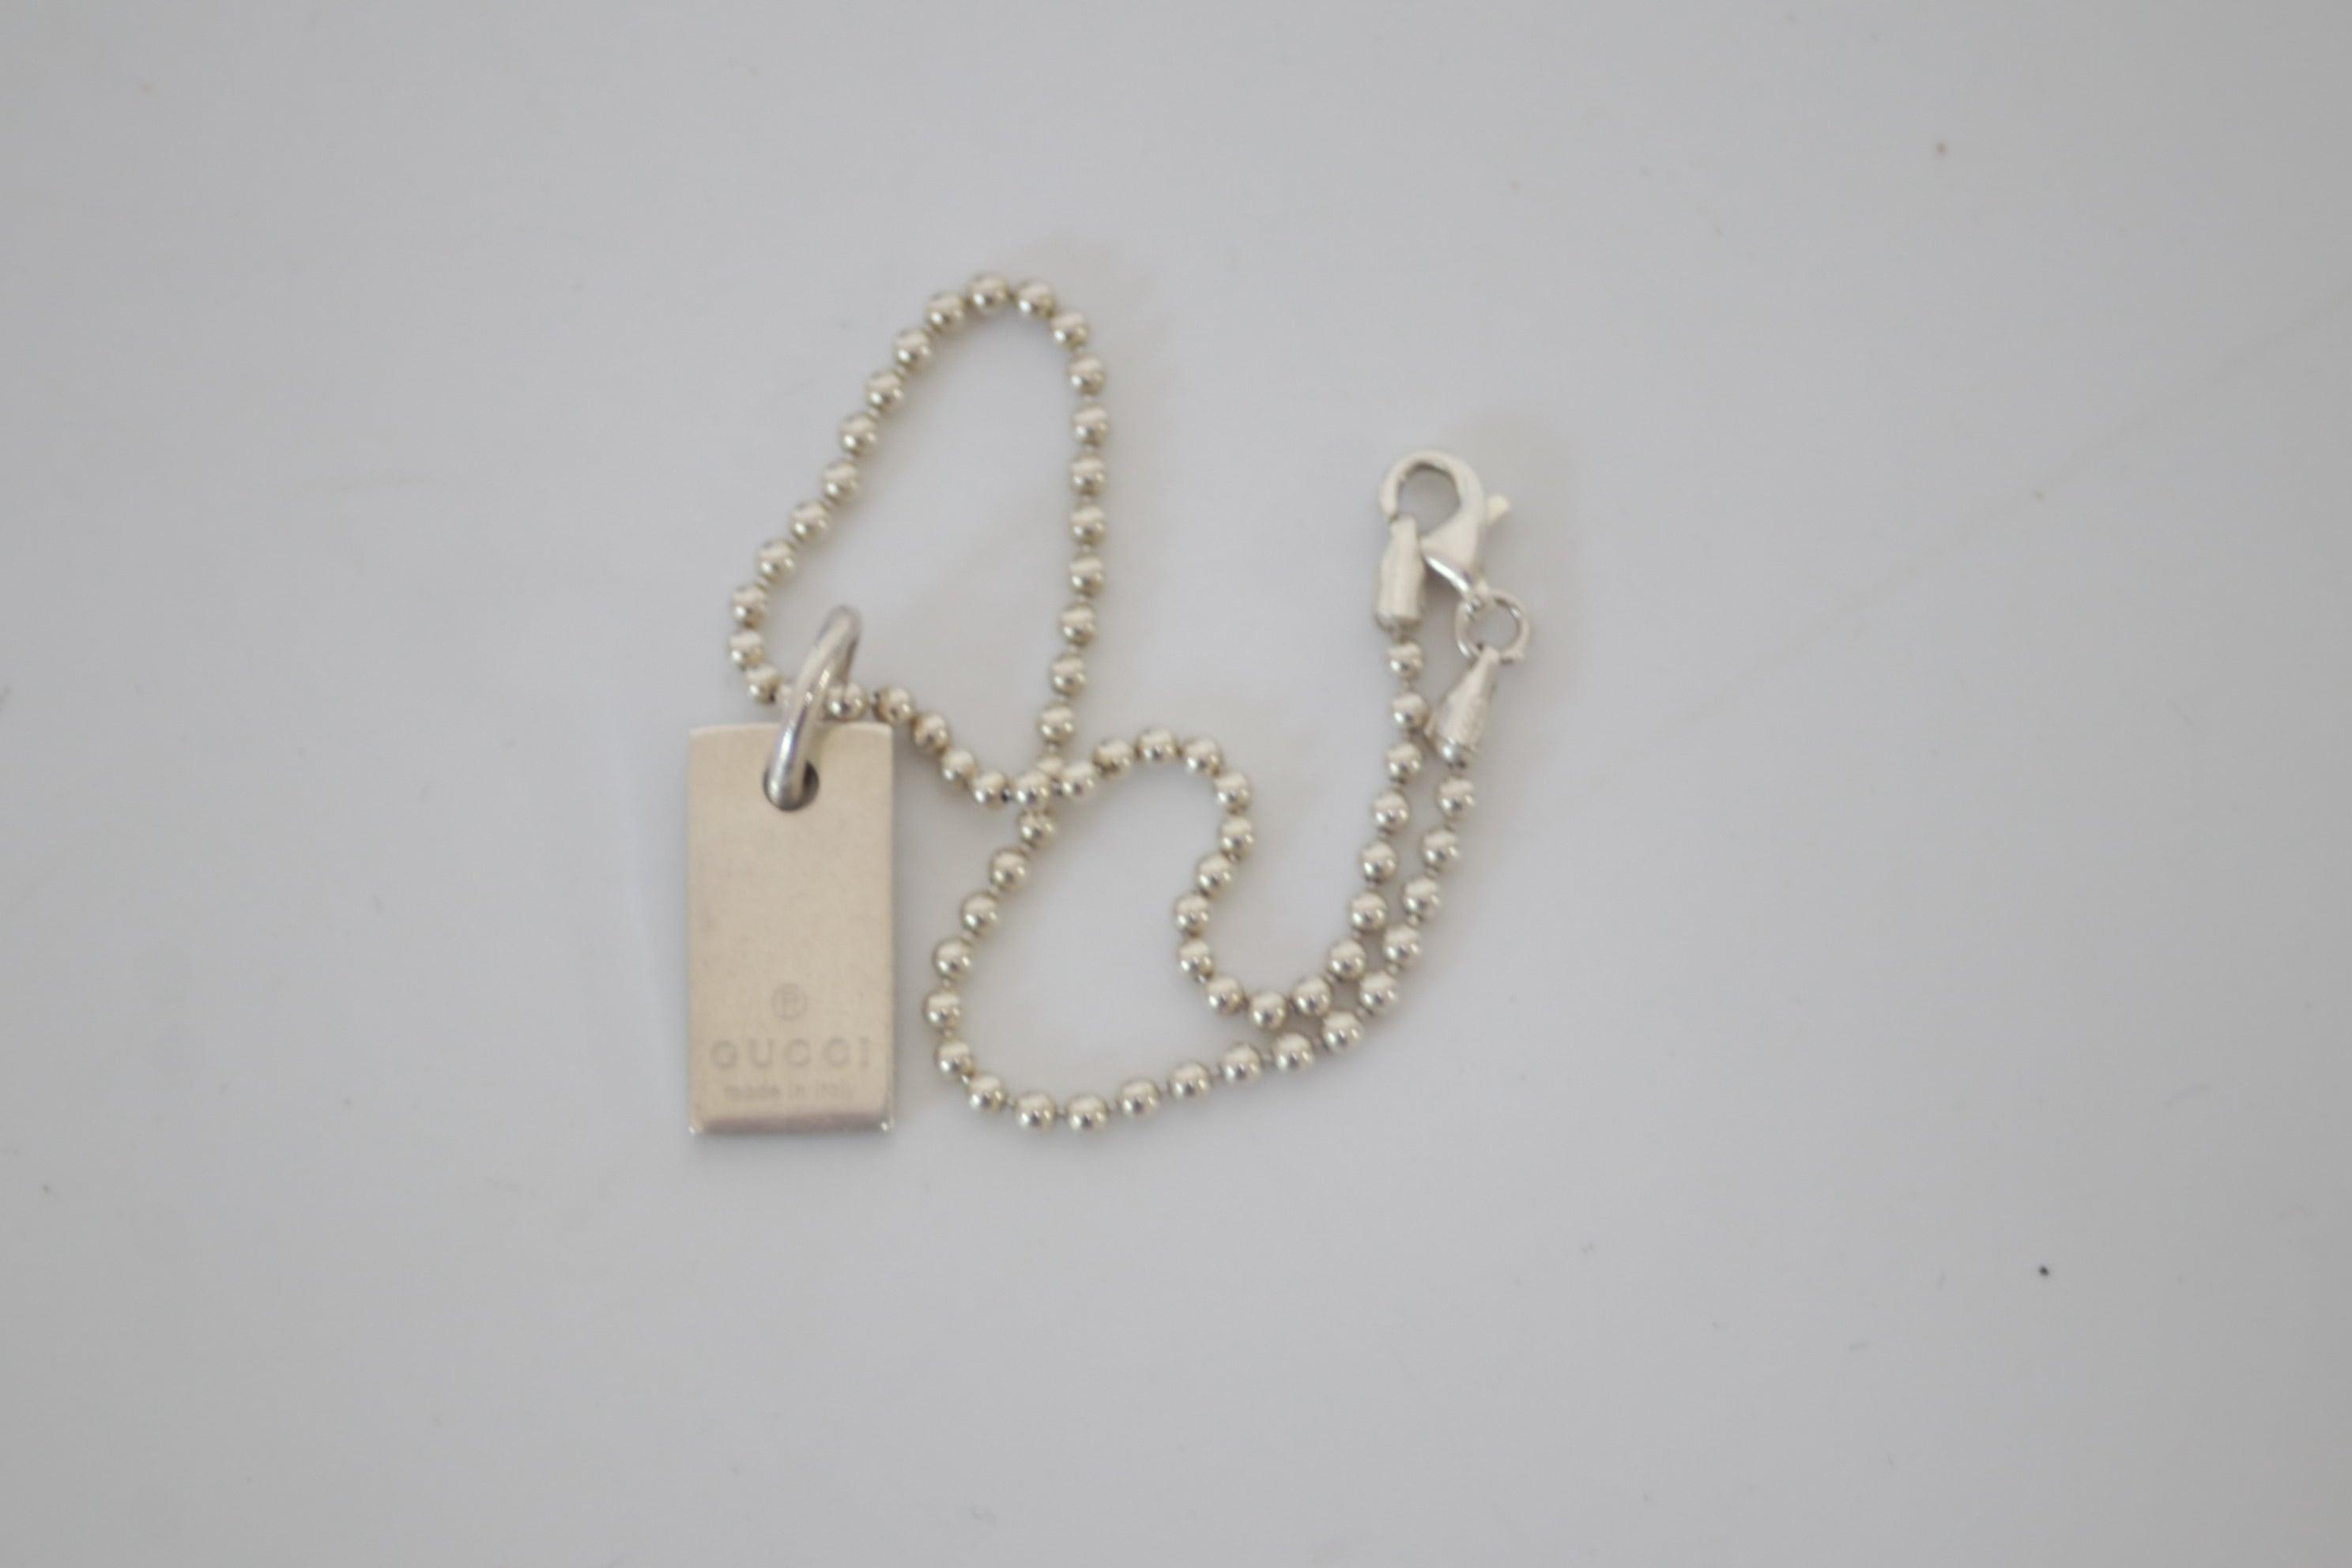 Gucci Name Taq Braclet Silver Used (7568)